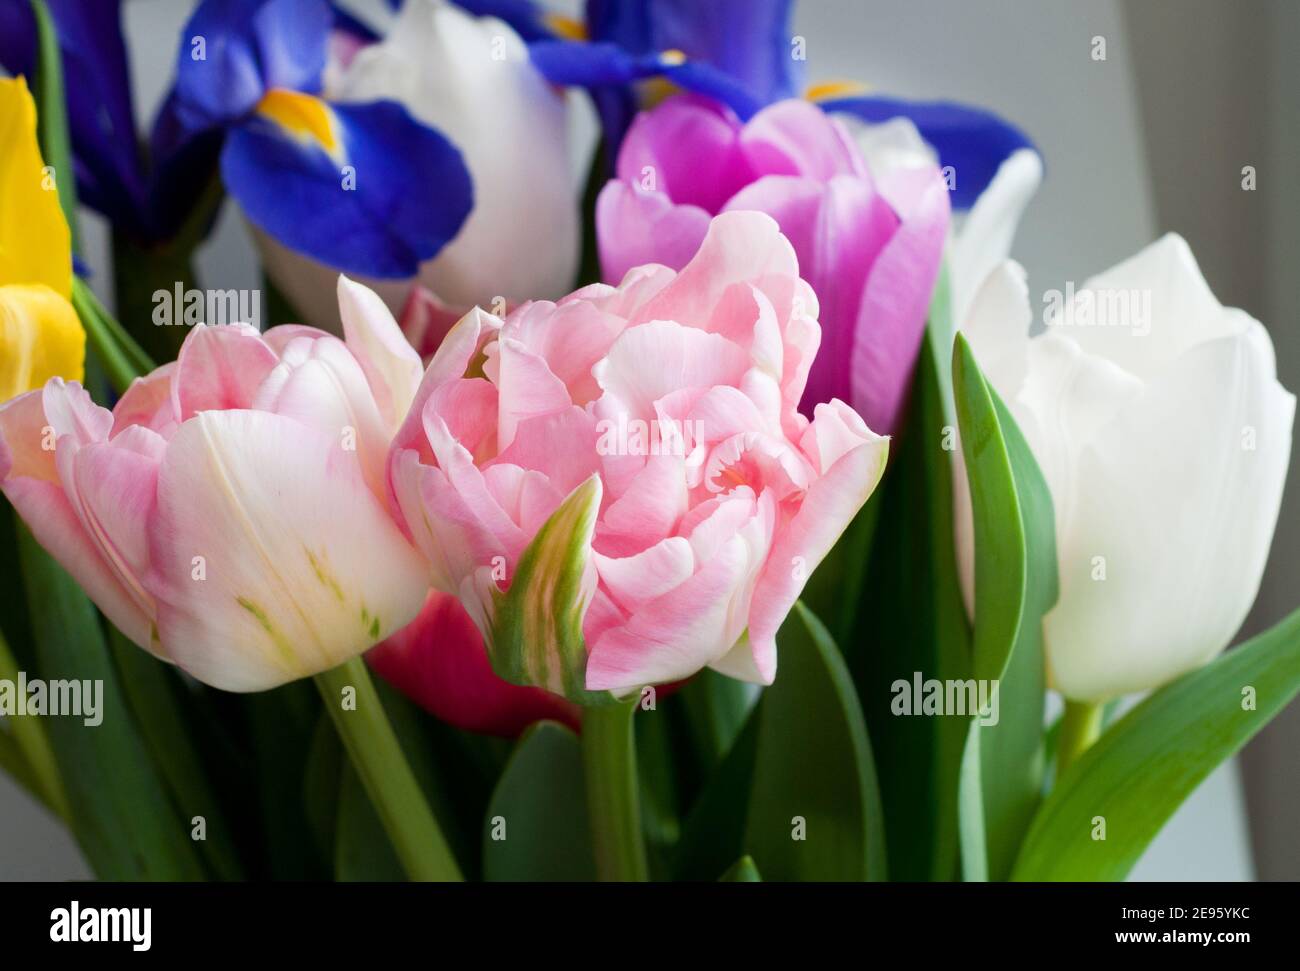 Beautiful bouquet of multi-colored tulips and irises. Peony pink tulips close-up. Stock Photo